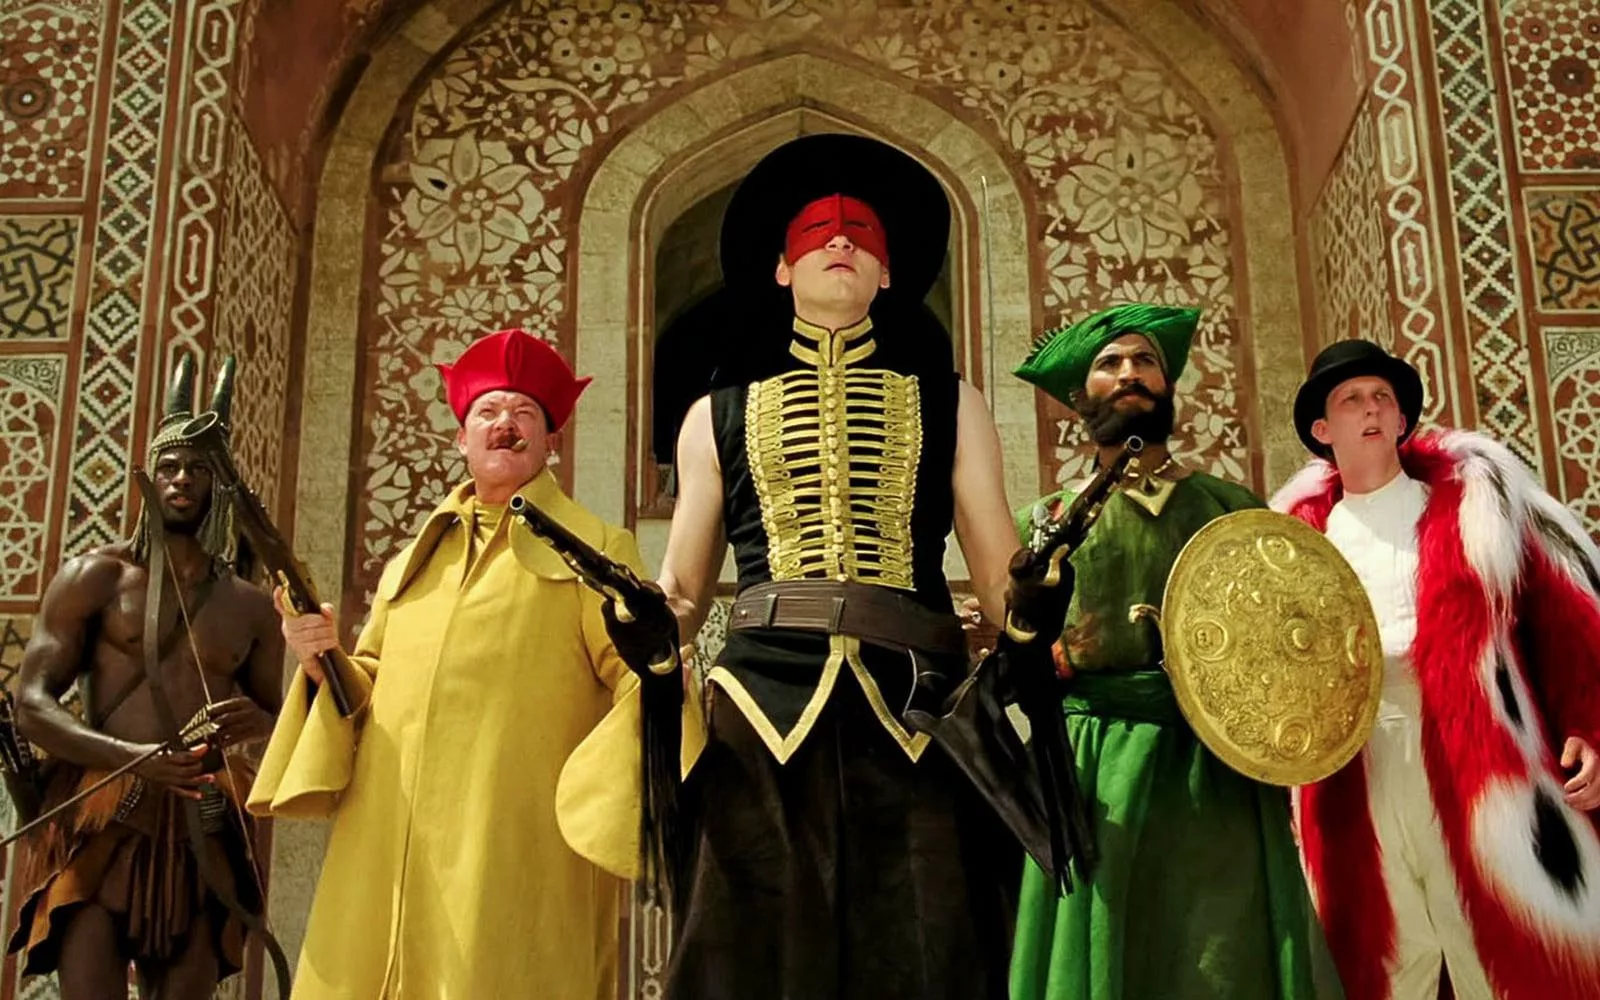 Five men, each holding a weapon, costumed so elaborately it's impossible to describe here, except the man in the center in a black, wide-brimmed hat and a black, gold-laced, sleeveless shirt, wearing a red mask across his eyes.